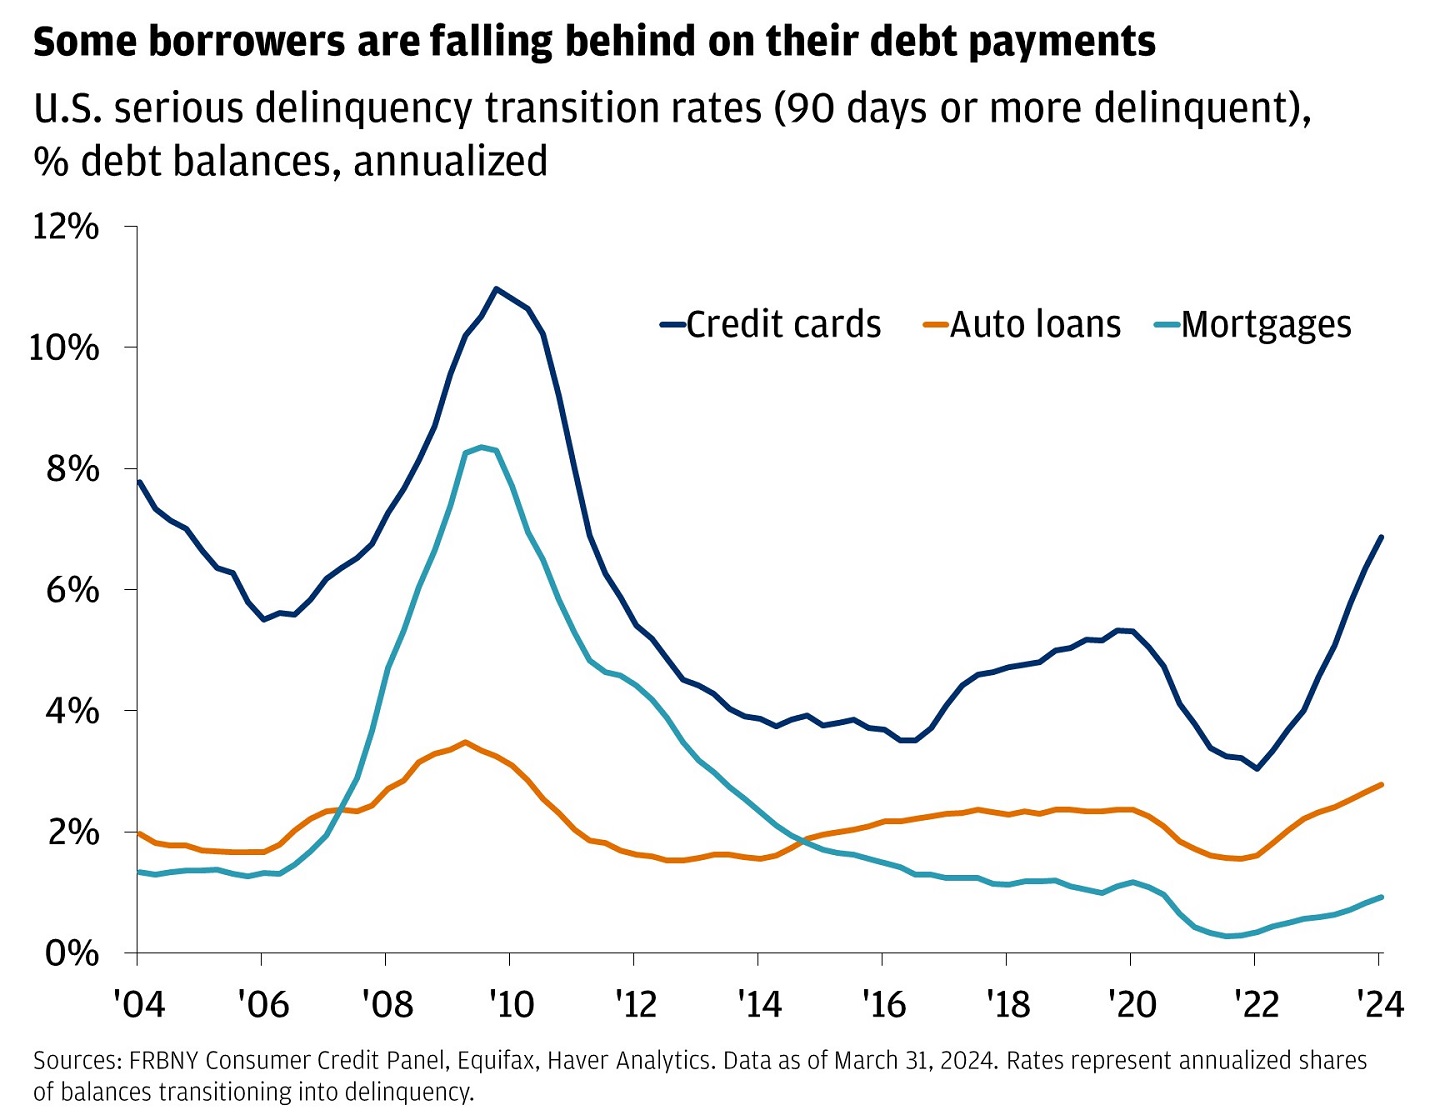 Line chart showing U.S. serious delinquency transition rates as a percentage of debt balances.